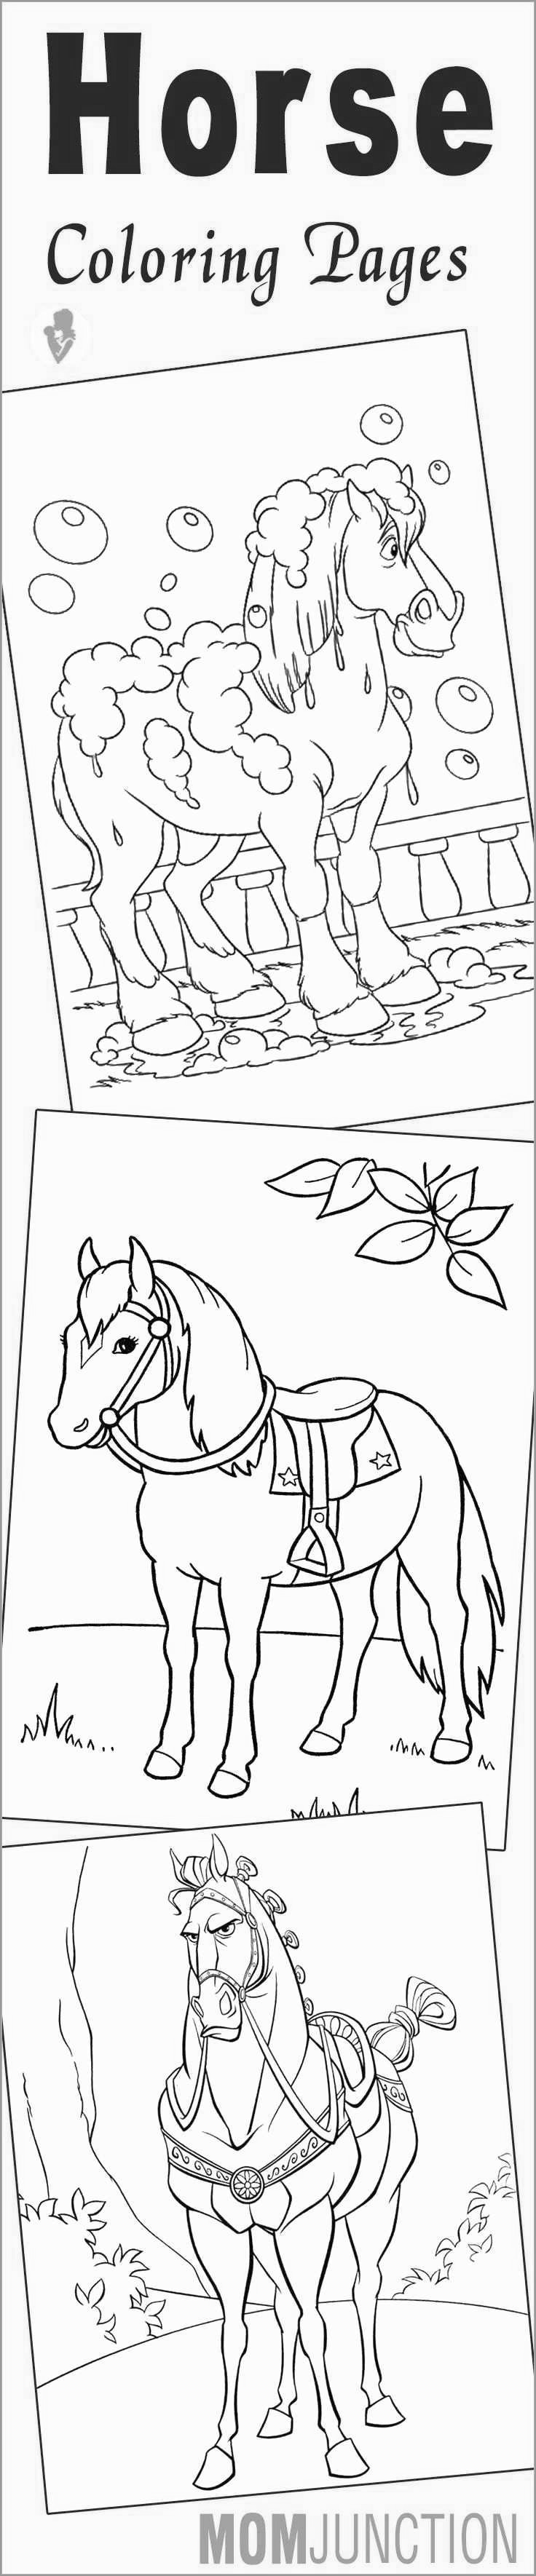 Free Printable Horse Coloring Pages Pretty Free Coloring Pages for